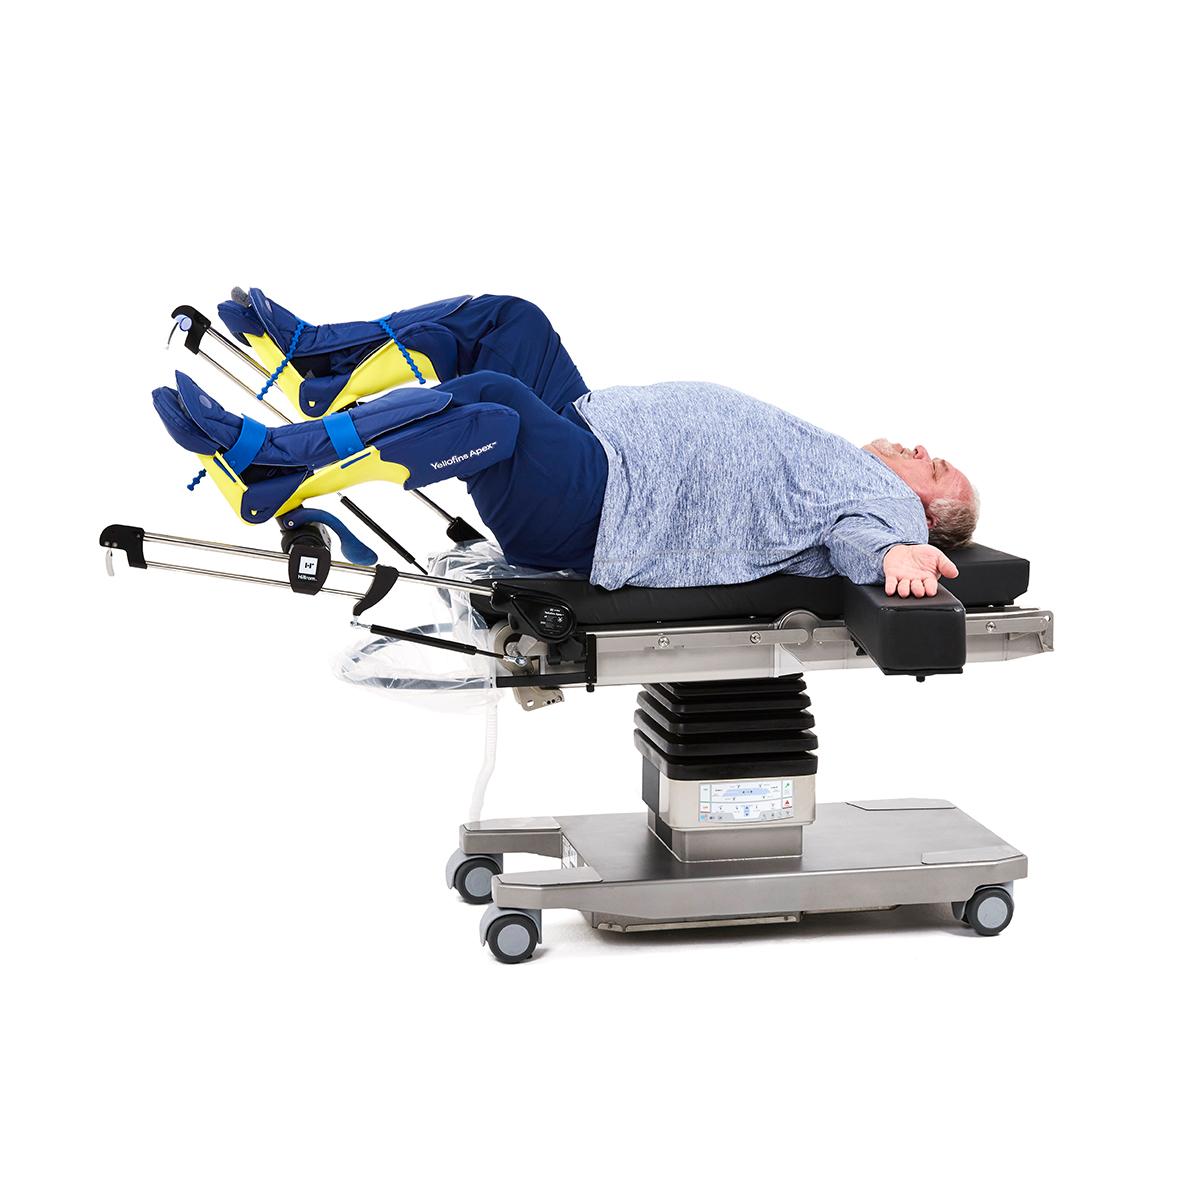 Bariatric patient positioned on Hillrom surgical table equipped with Urology Deluxe accessories. 